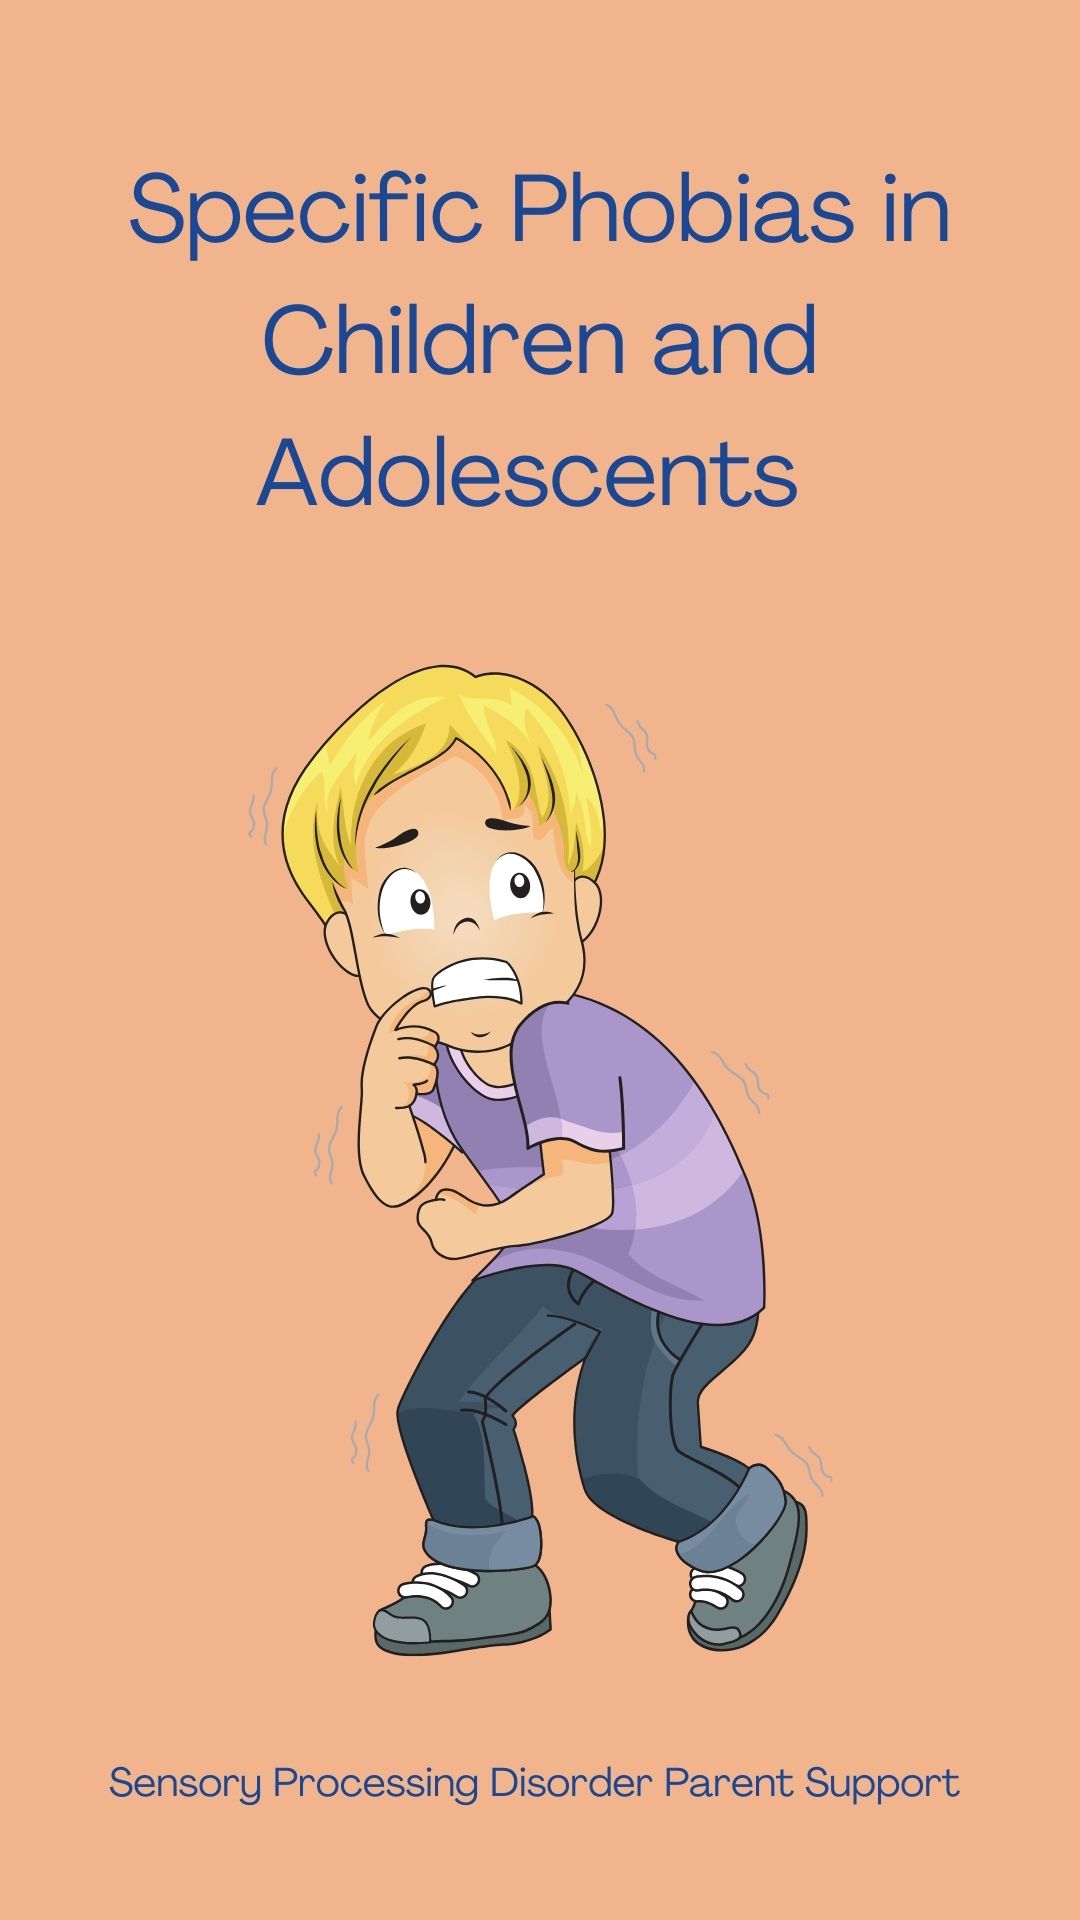 Specific Phobias in Children and Adolescents